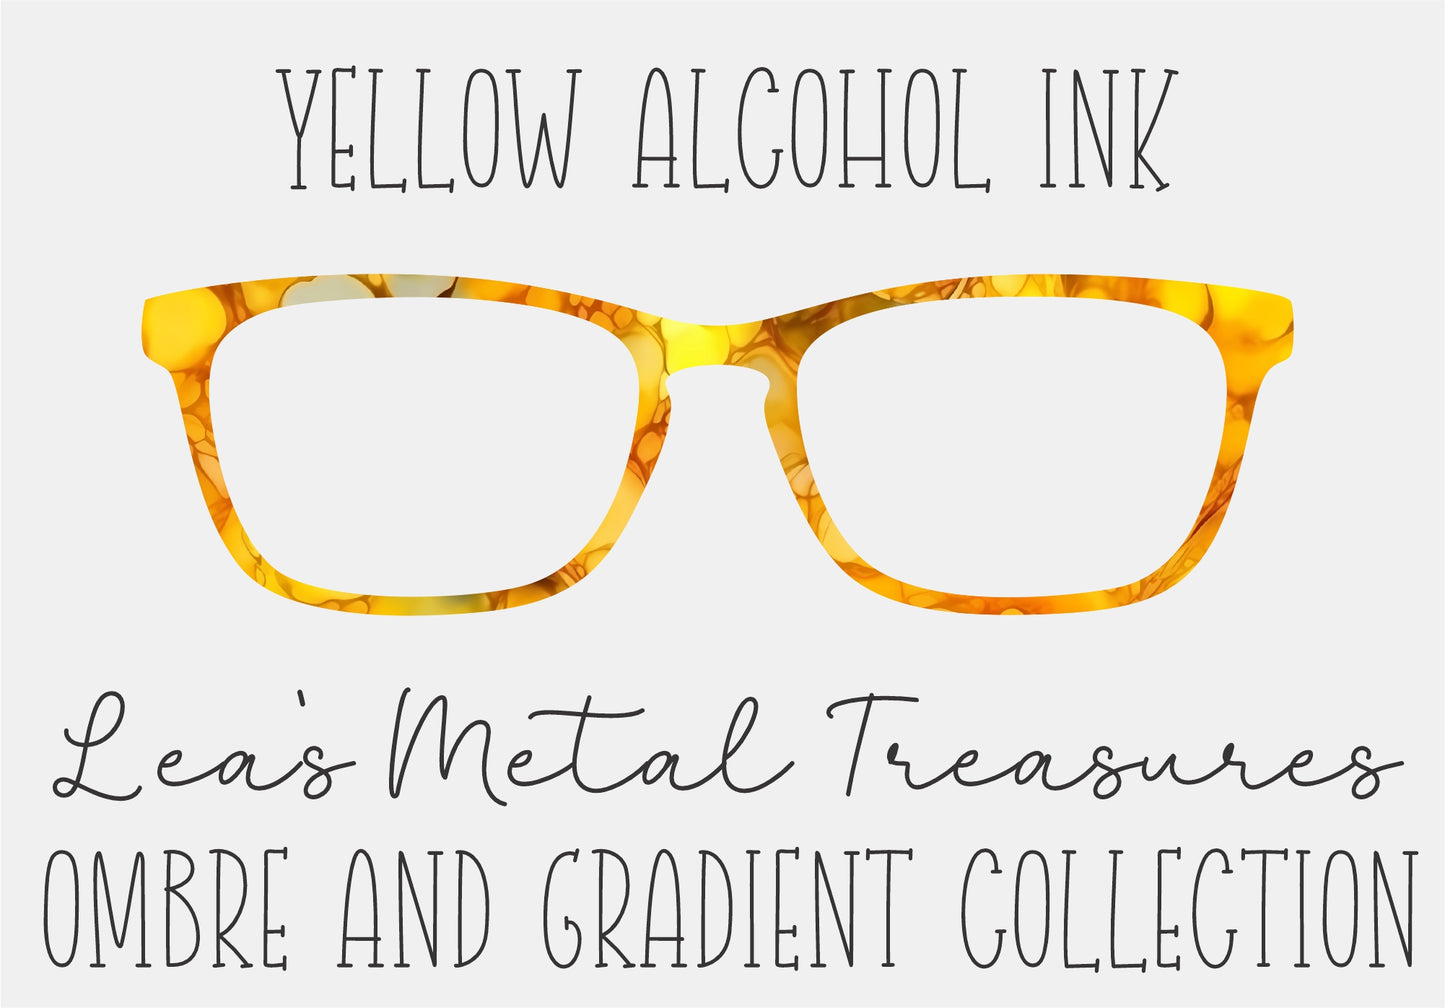 YELLOW ALCOHOL INK Eyewear Frame Toppers COMES WITH MAGNETS